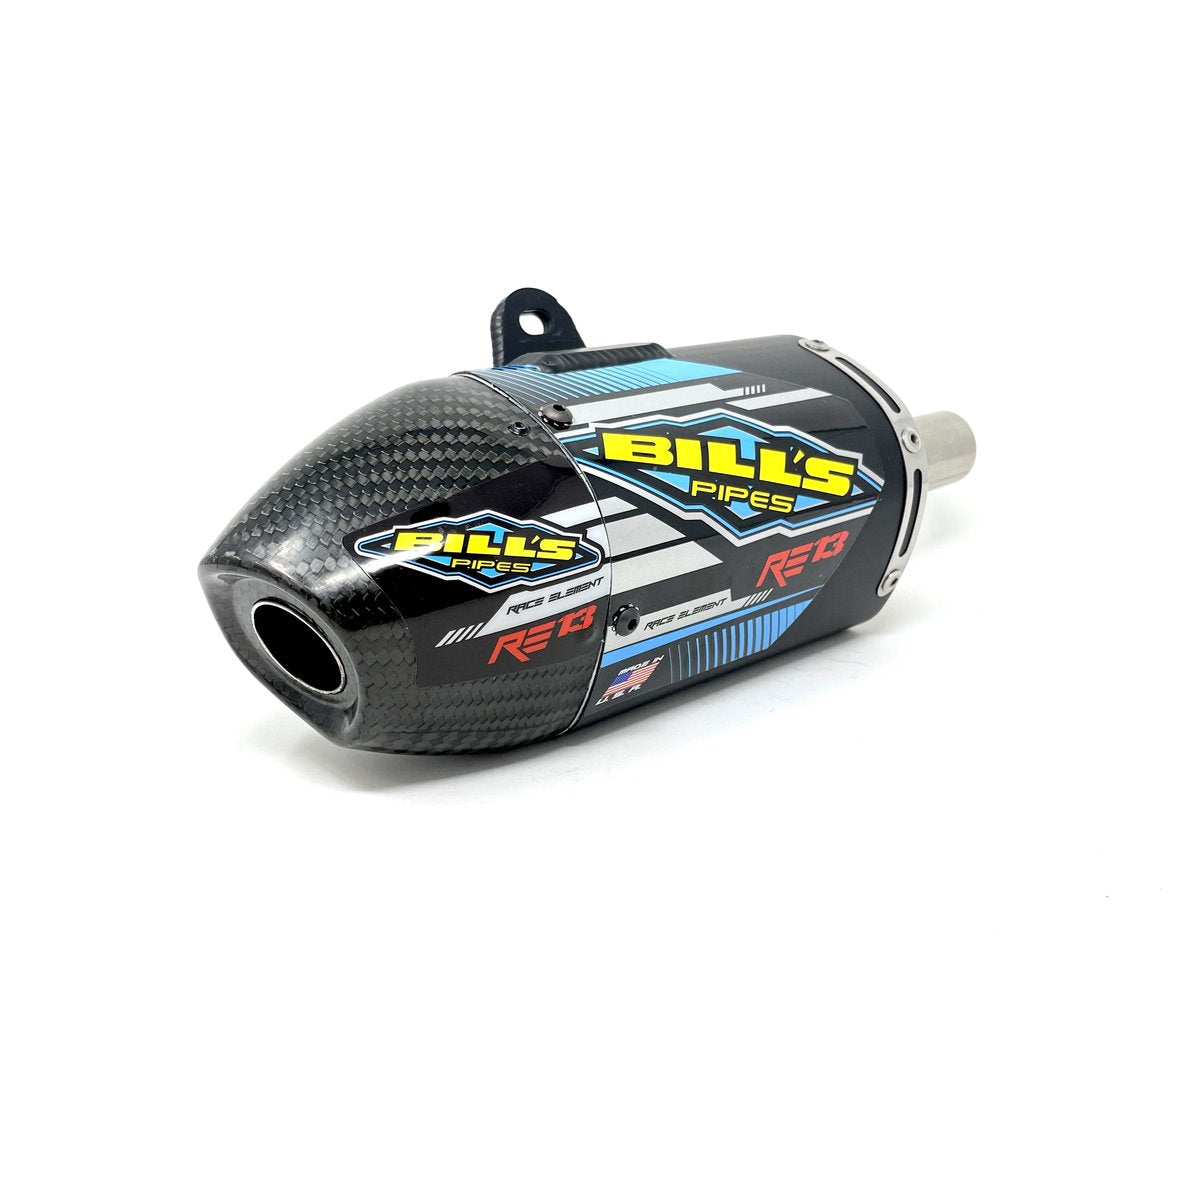 Bill's Pipes RE 13 Exhaust - TTR110